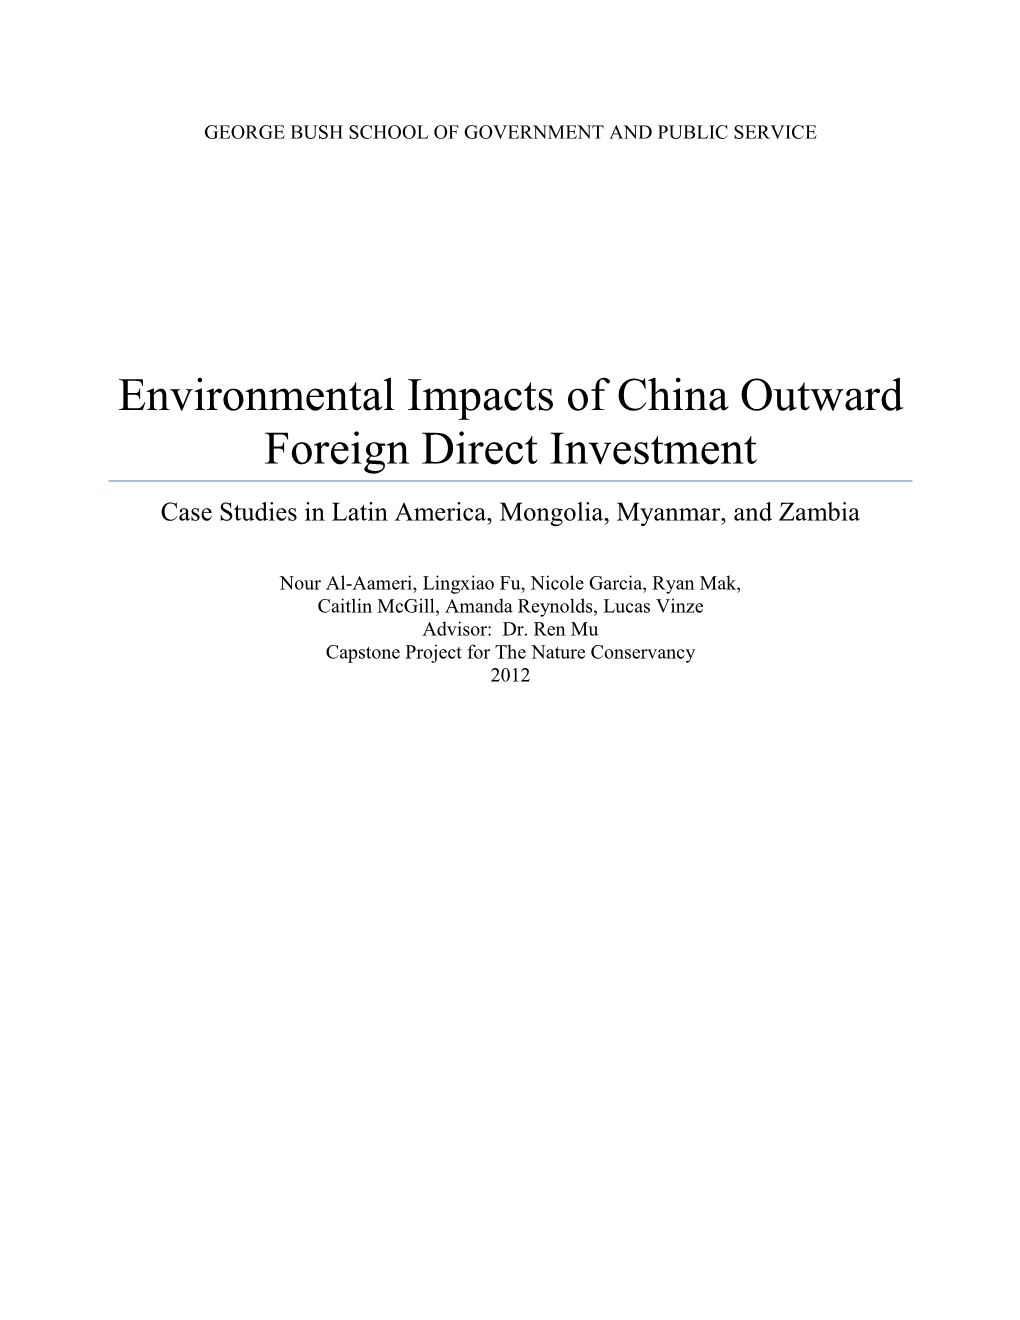 Environmental Impacts of China Outward Foreign Direct Investment